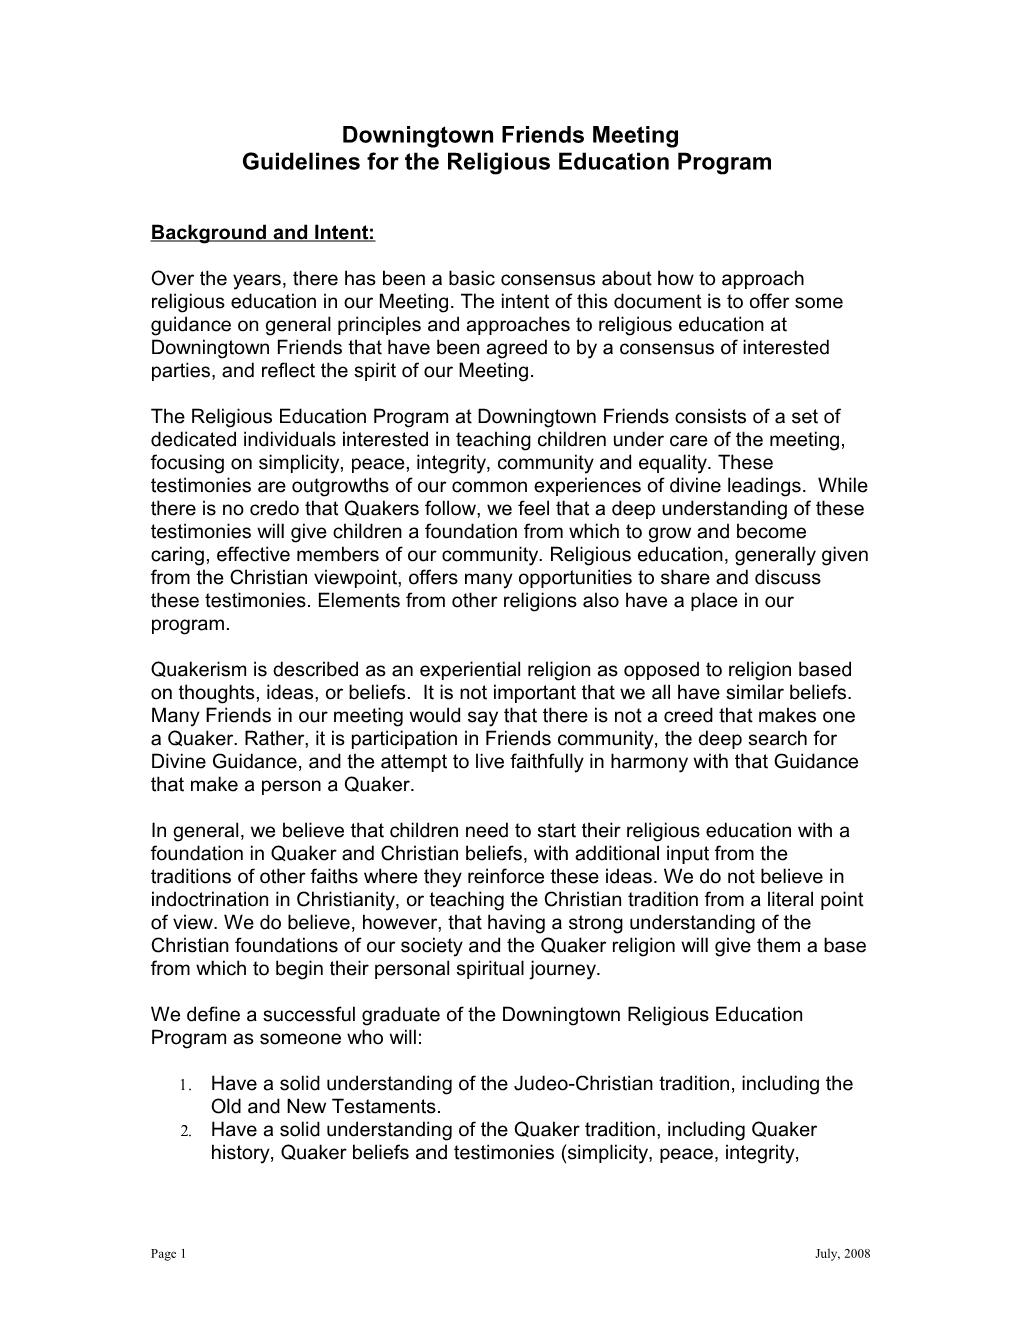 Guidelines for Religious Education Program, Downingtown Friends